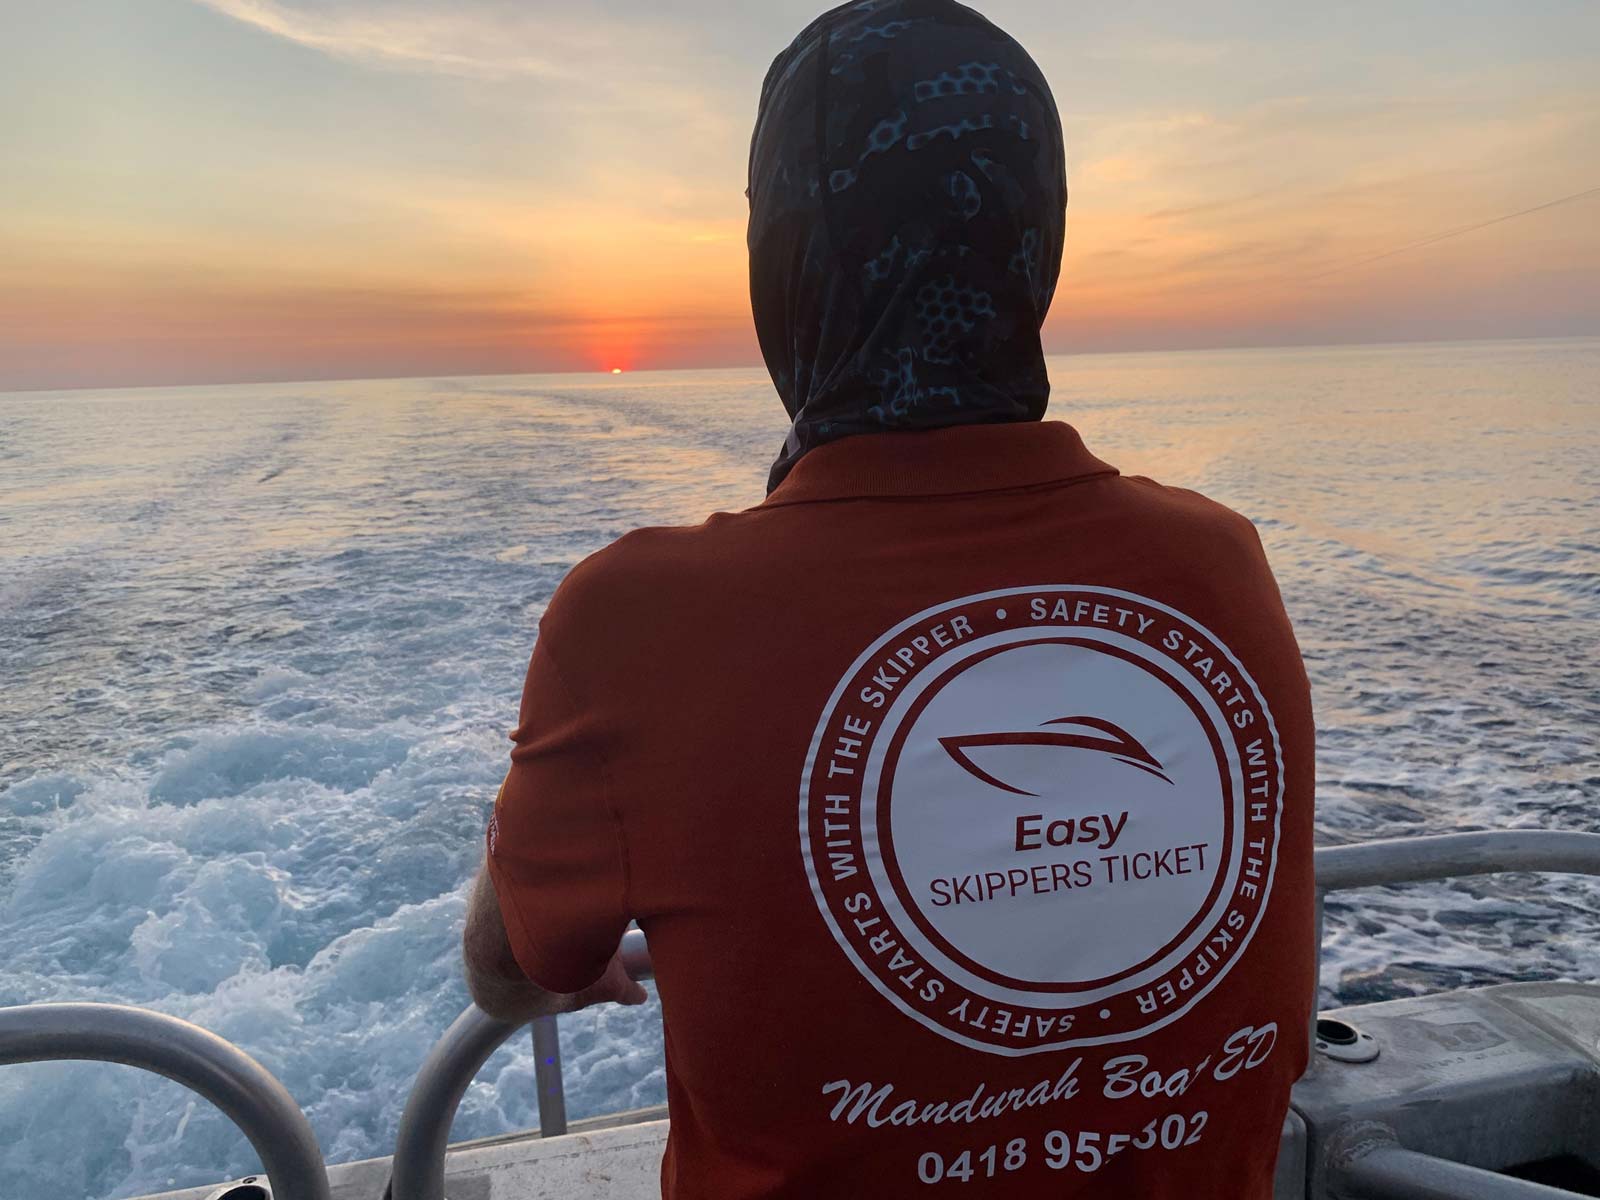 Brian Edwards at back of boat looking at the sunset wearing a tee shirt with Easy Skippers Ticket logo and phone number